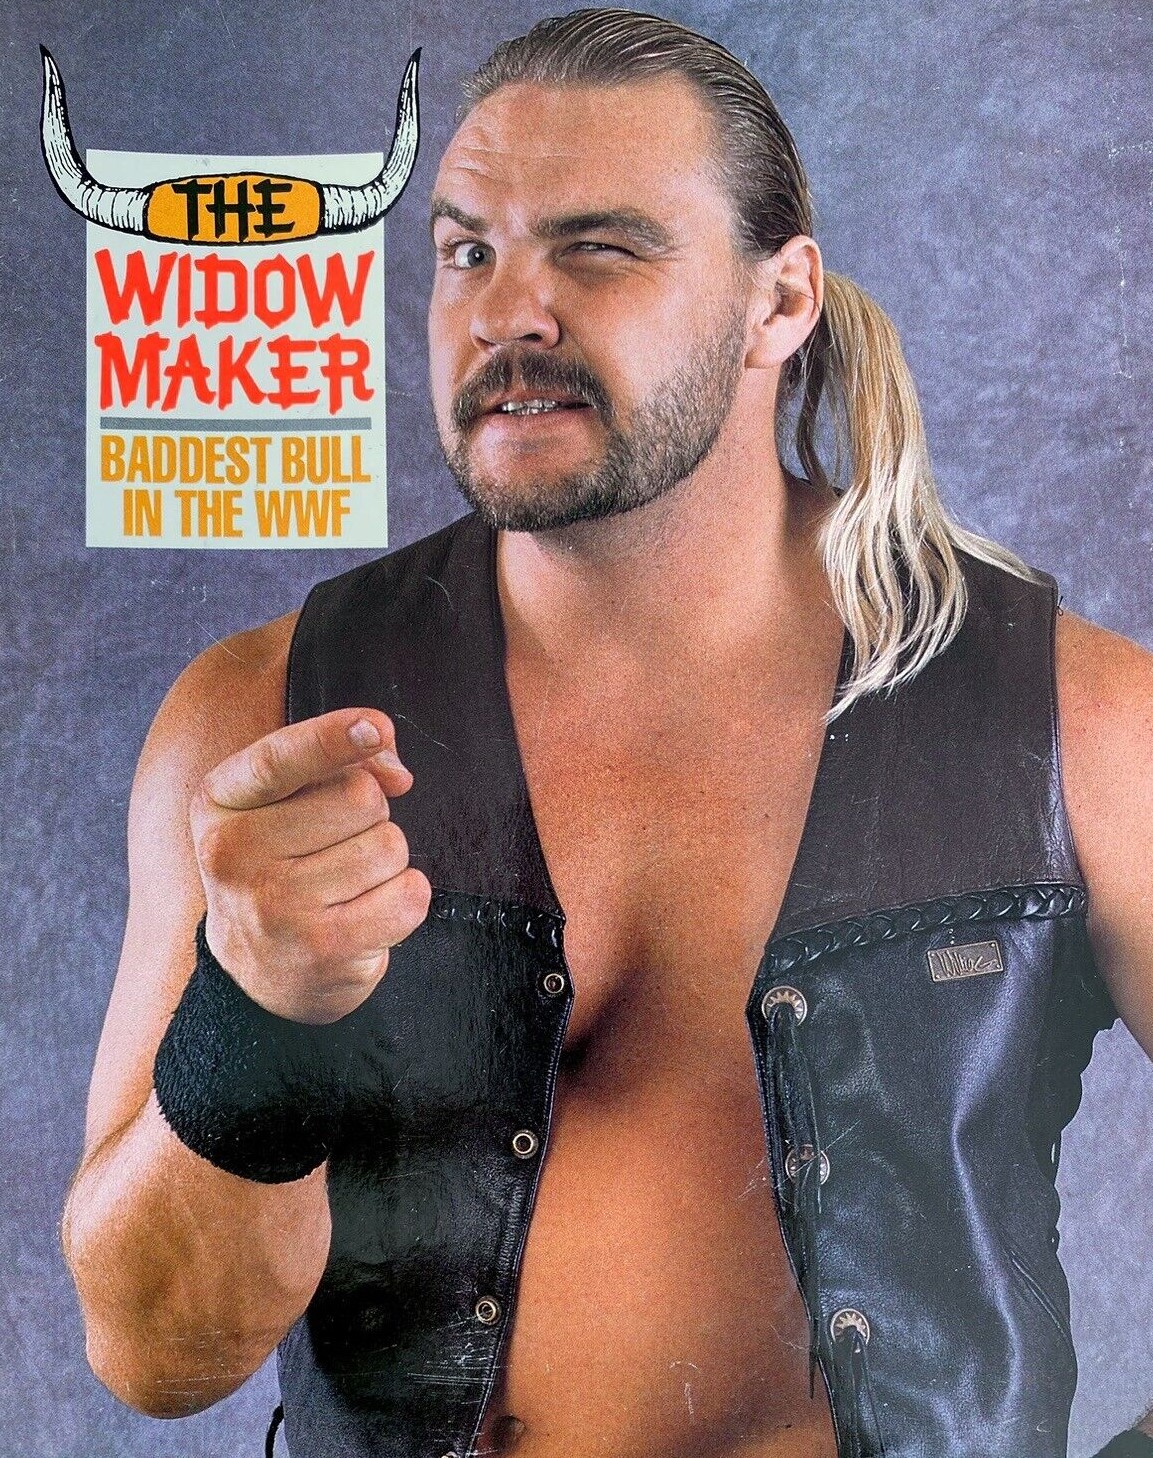 Barry Windham as The Widow maker in WWF.